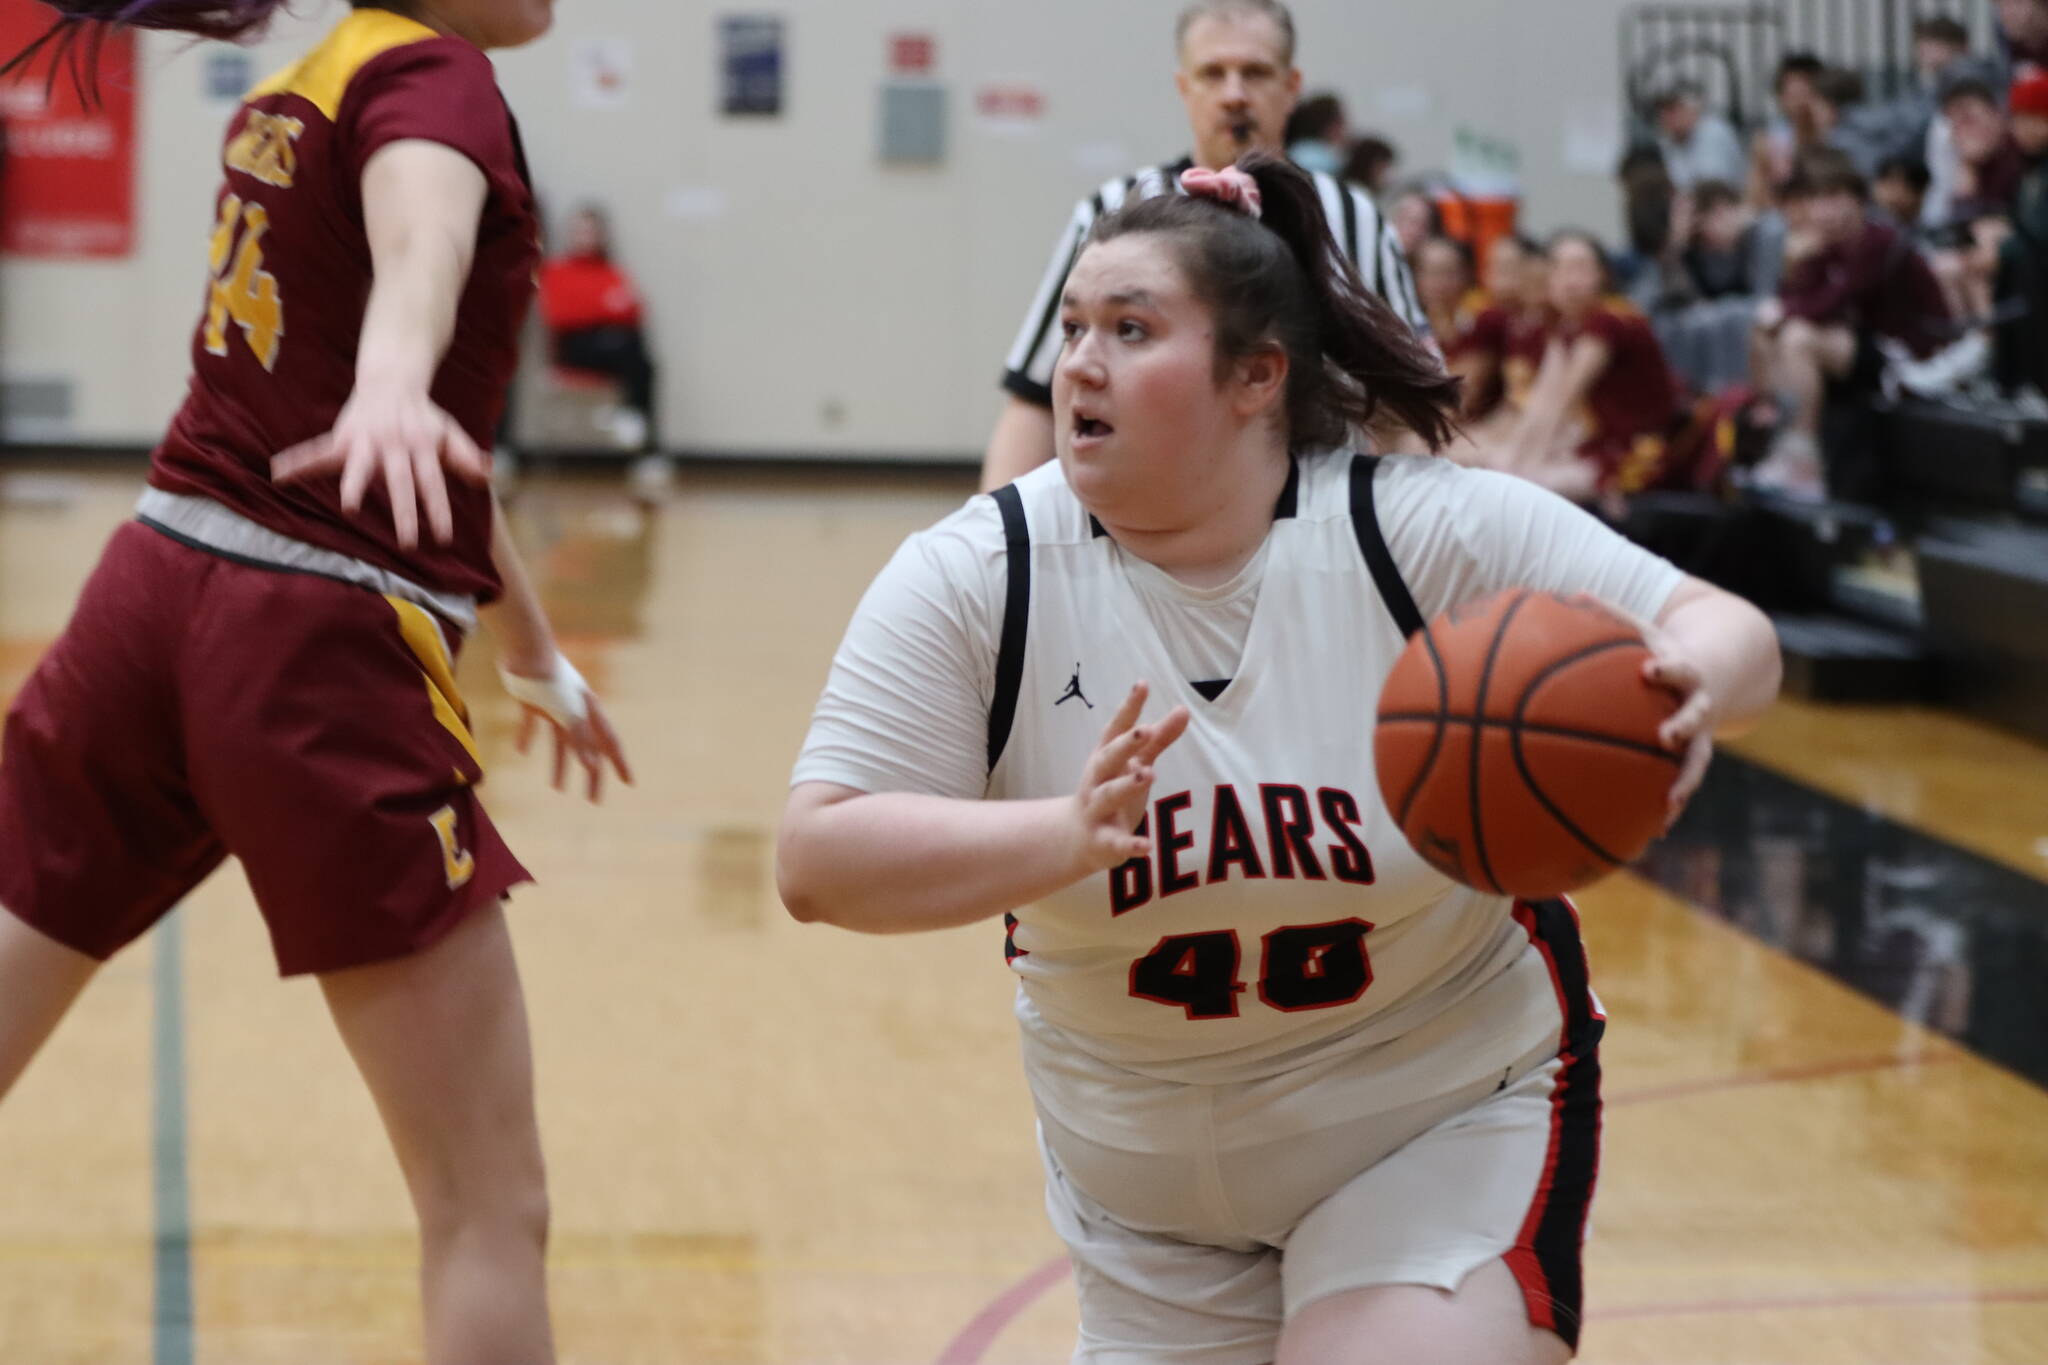 JDHS senior Izzy Waters takes the ball down court on Friday night against Mt. Edgecumbe High School for a non-conference game at home. (Jonson Kuhn / Juneau Empire)